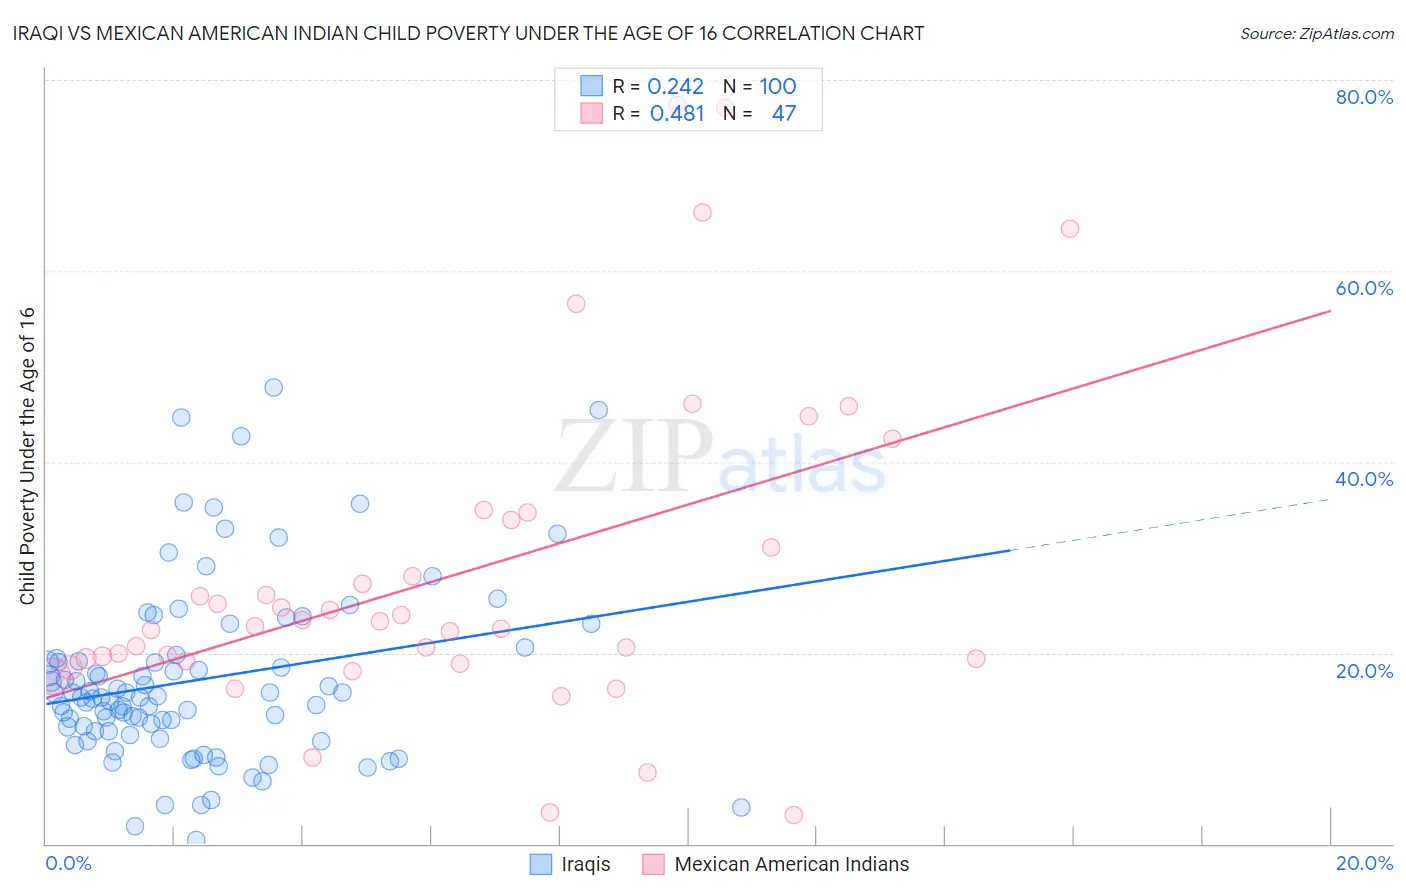 Iraqi vs Mexican American Indian Child Poverty Under the Age of 16